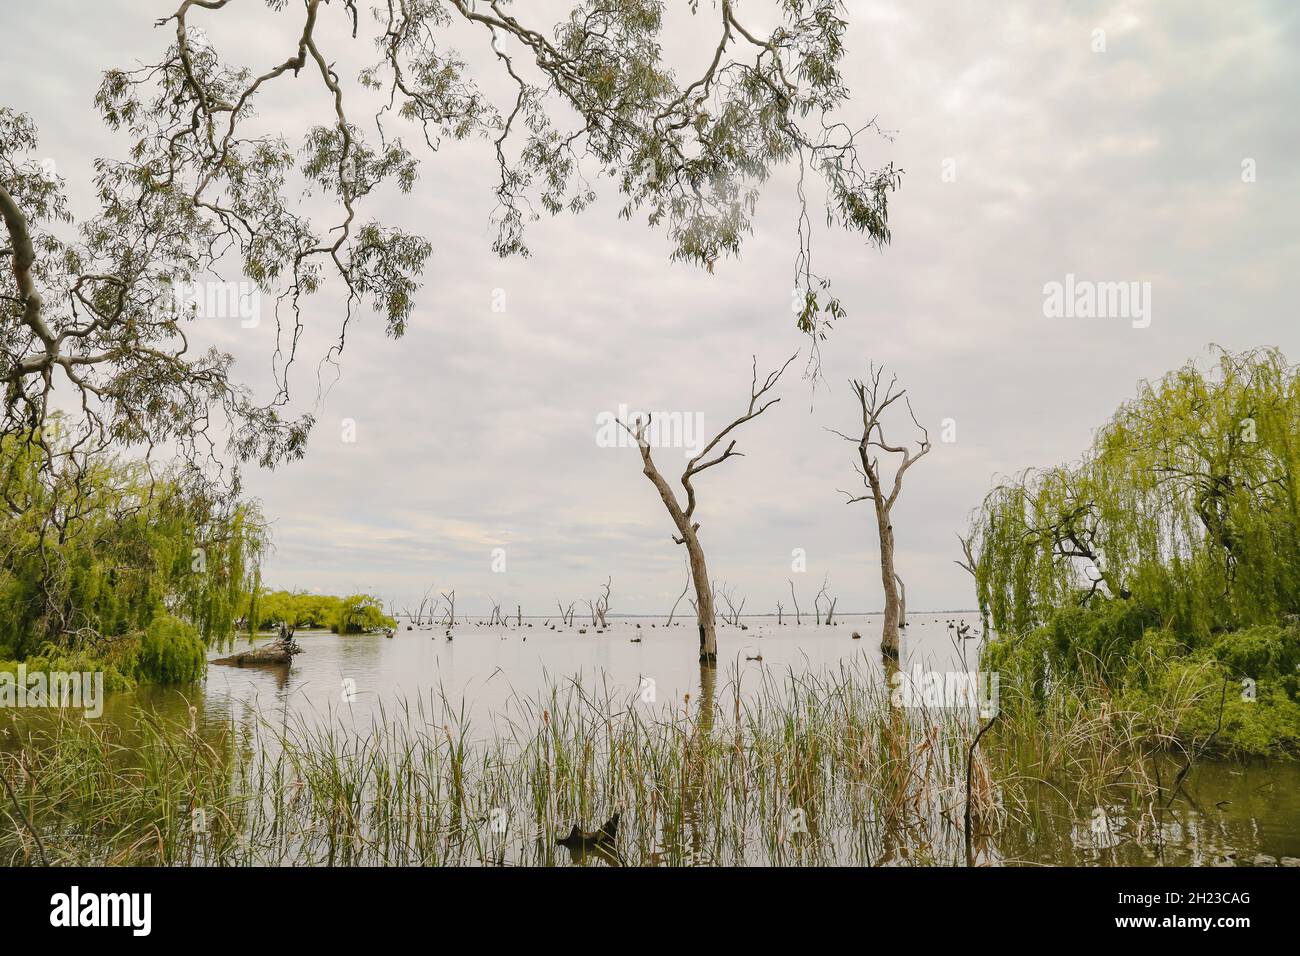 Tranquil natural setting at Kow Swamp in Central Victoria, Australia Stock Photo